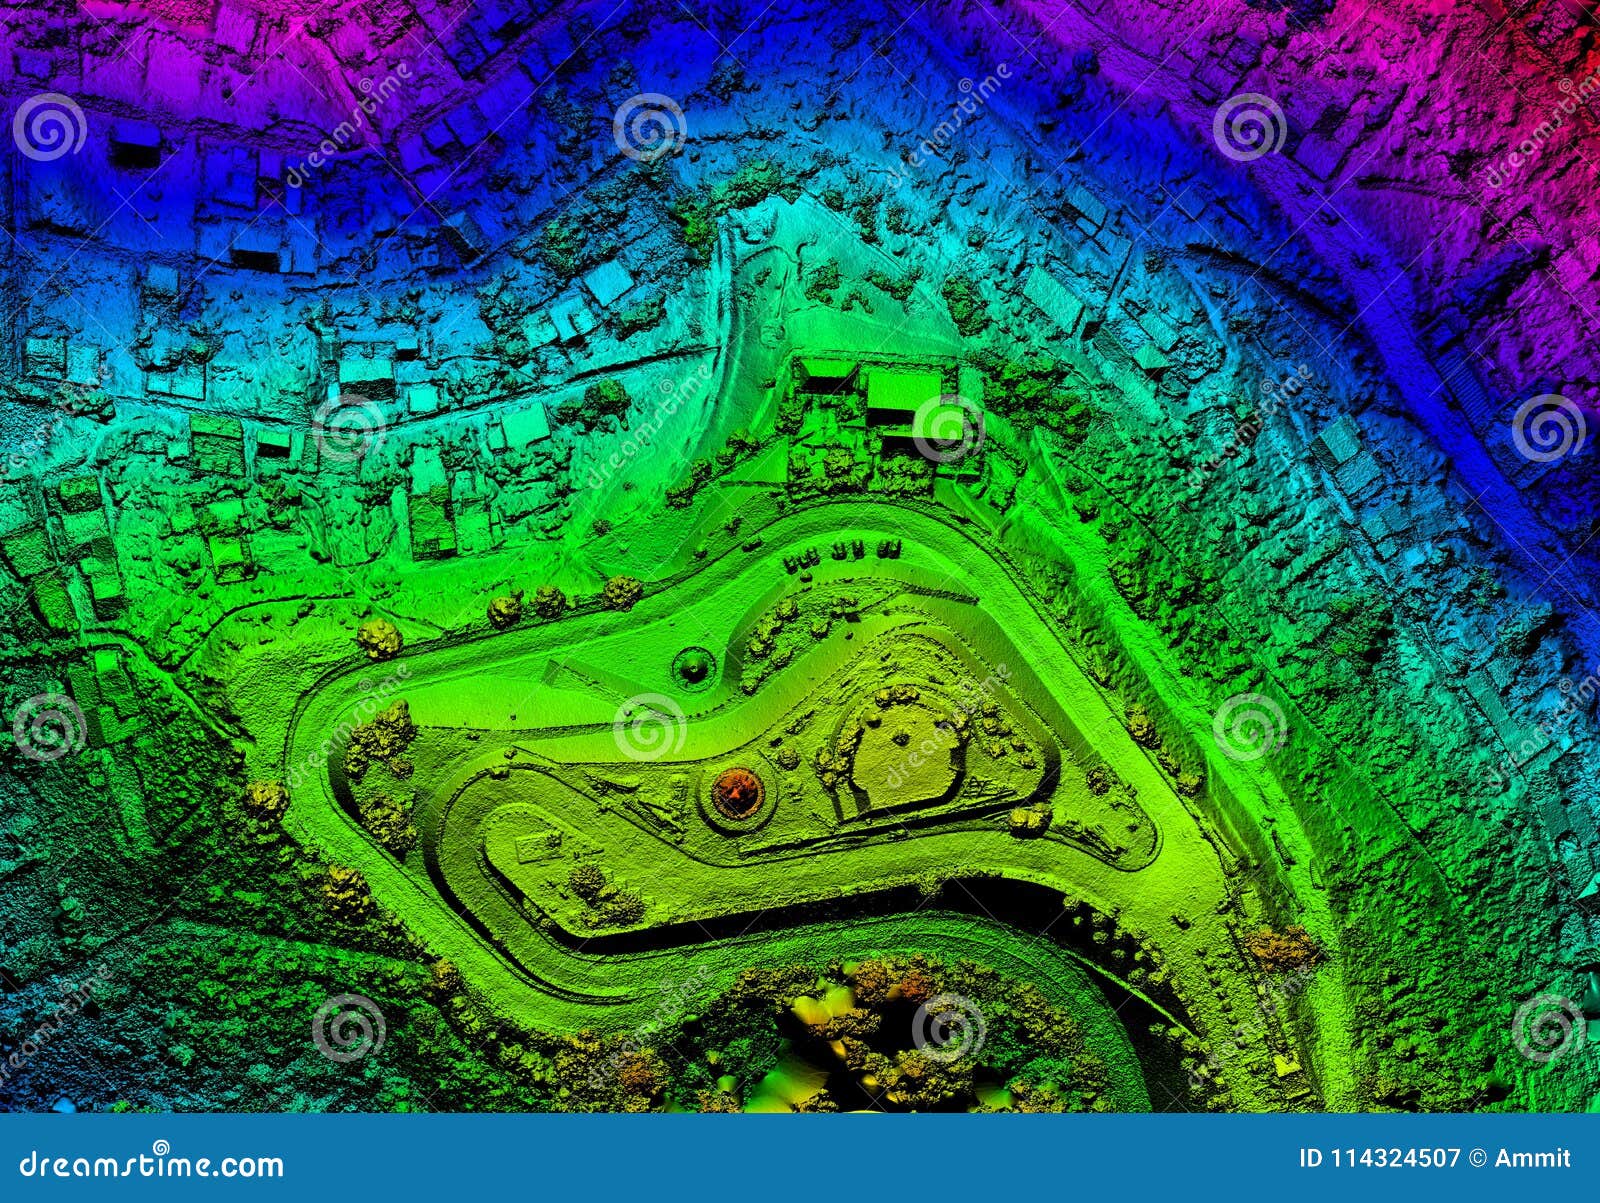 high resolution orthorectified, orthorectification aerial map used for photogrammetry